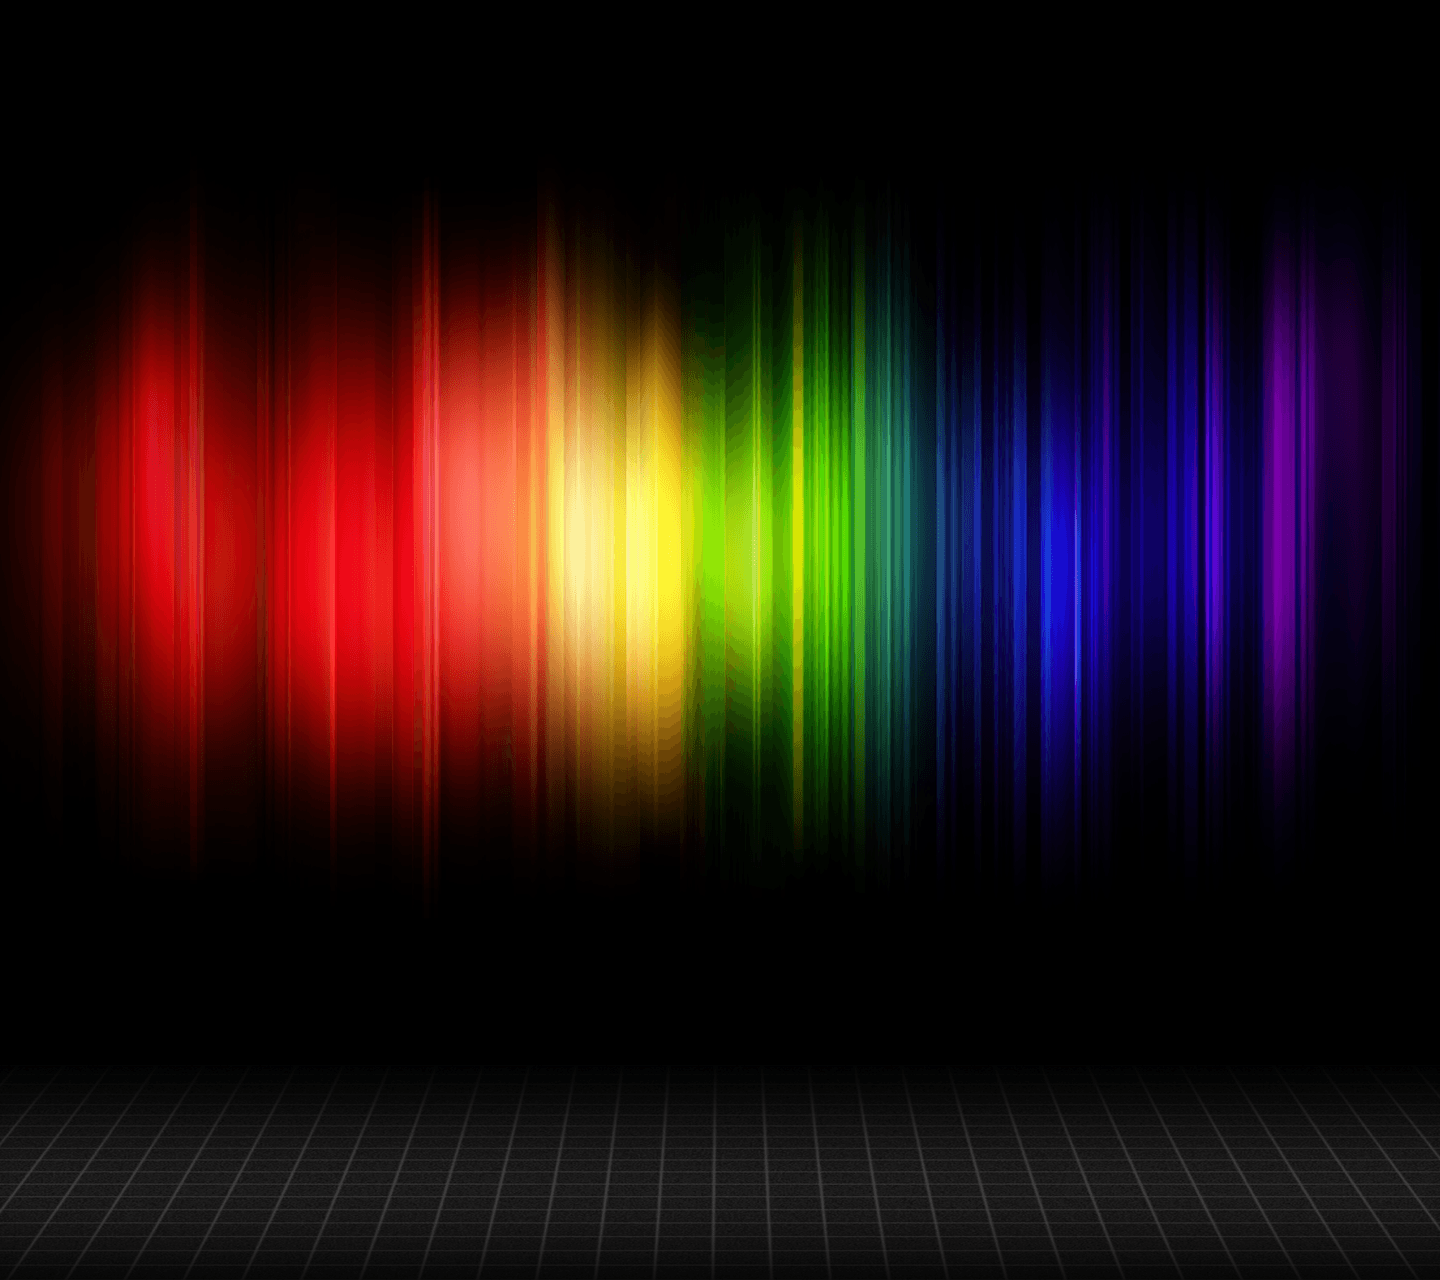 "Explore the color spectrum with a multicolor background."